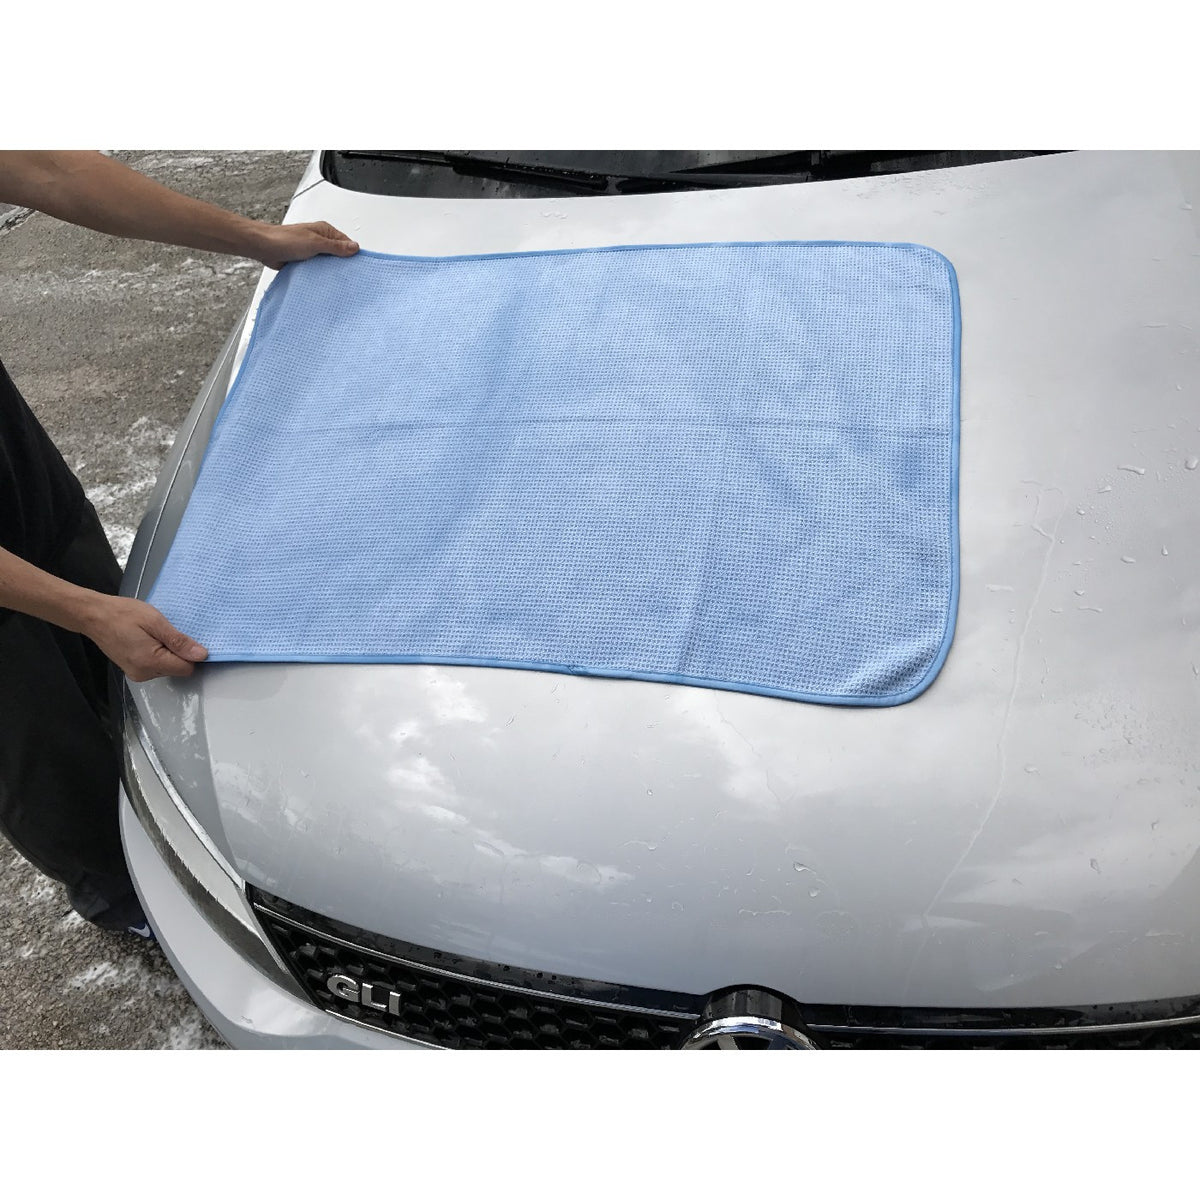 Waffle Weave Drying Towel: Absorbent, Designed For Drying Your Car, Truck,  or SUV – Patterson Car Care